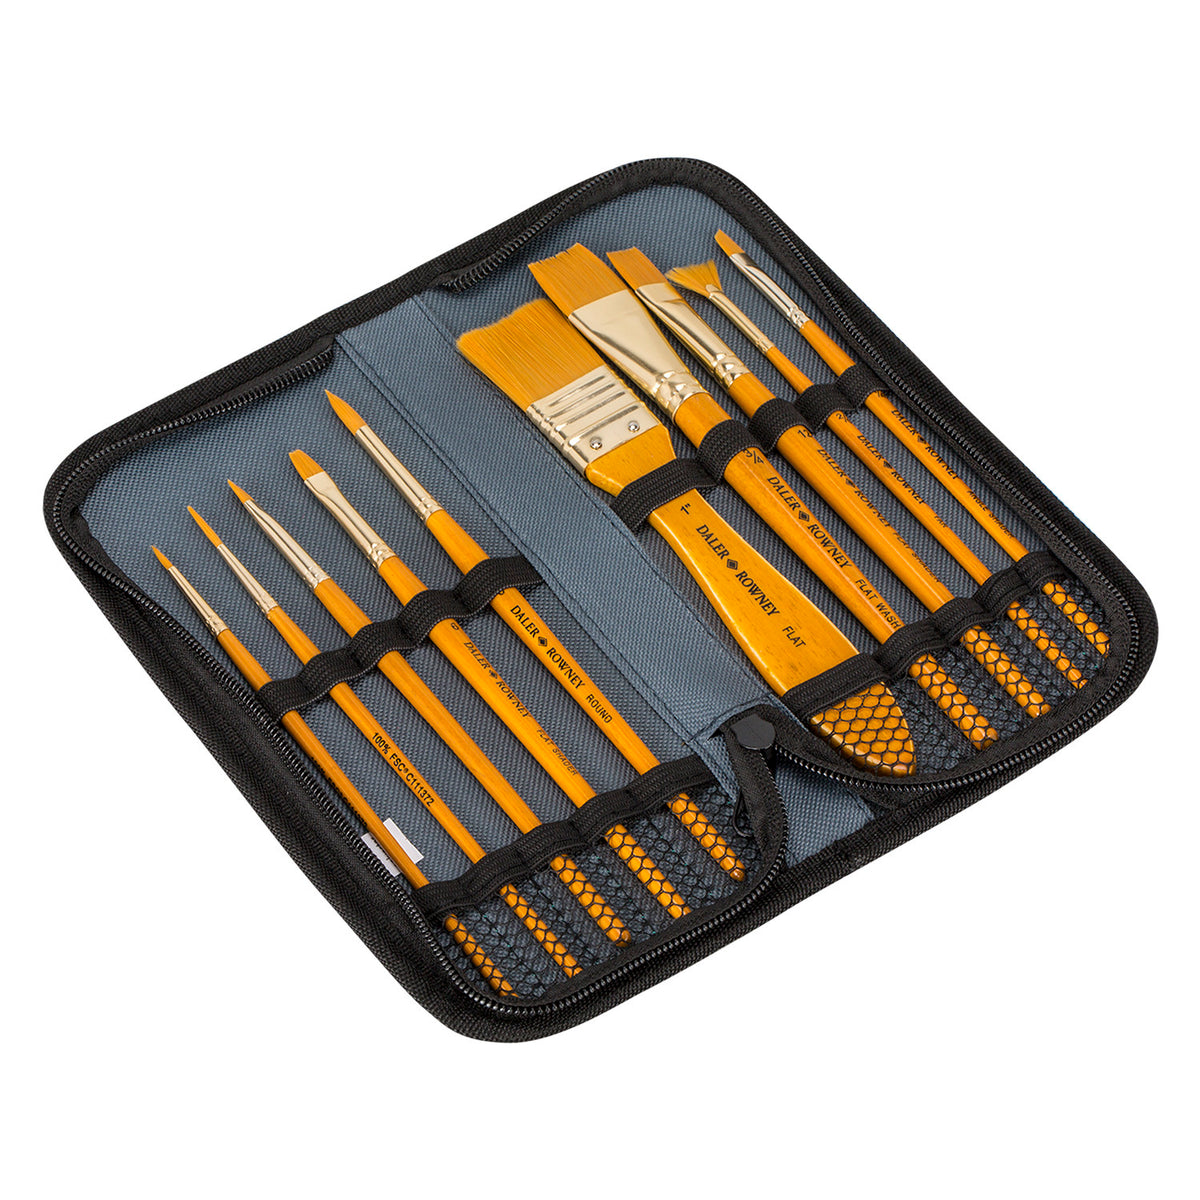 Daler Rowney Simply Gold Taklon Synthetic Hairs Brush Set of 10  With Zip Case.